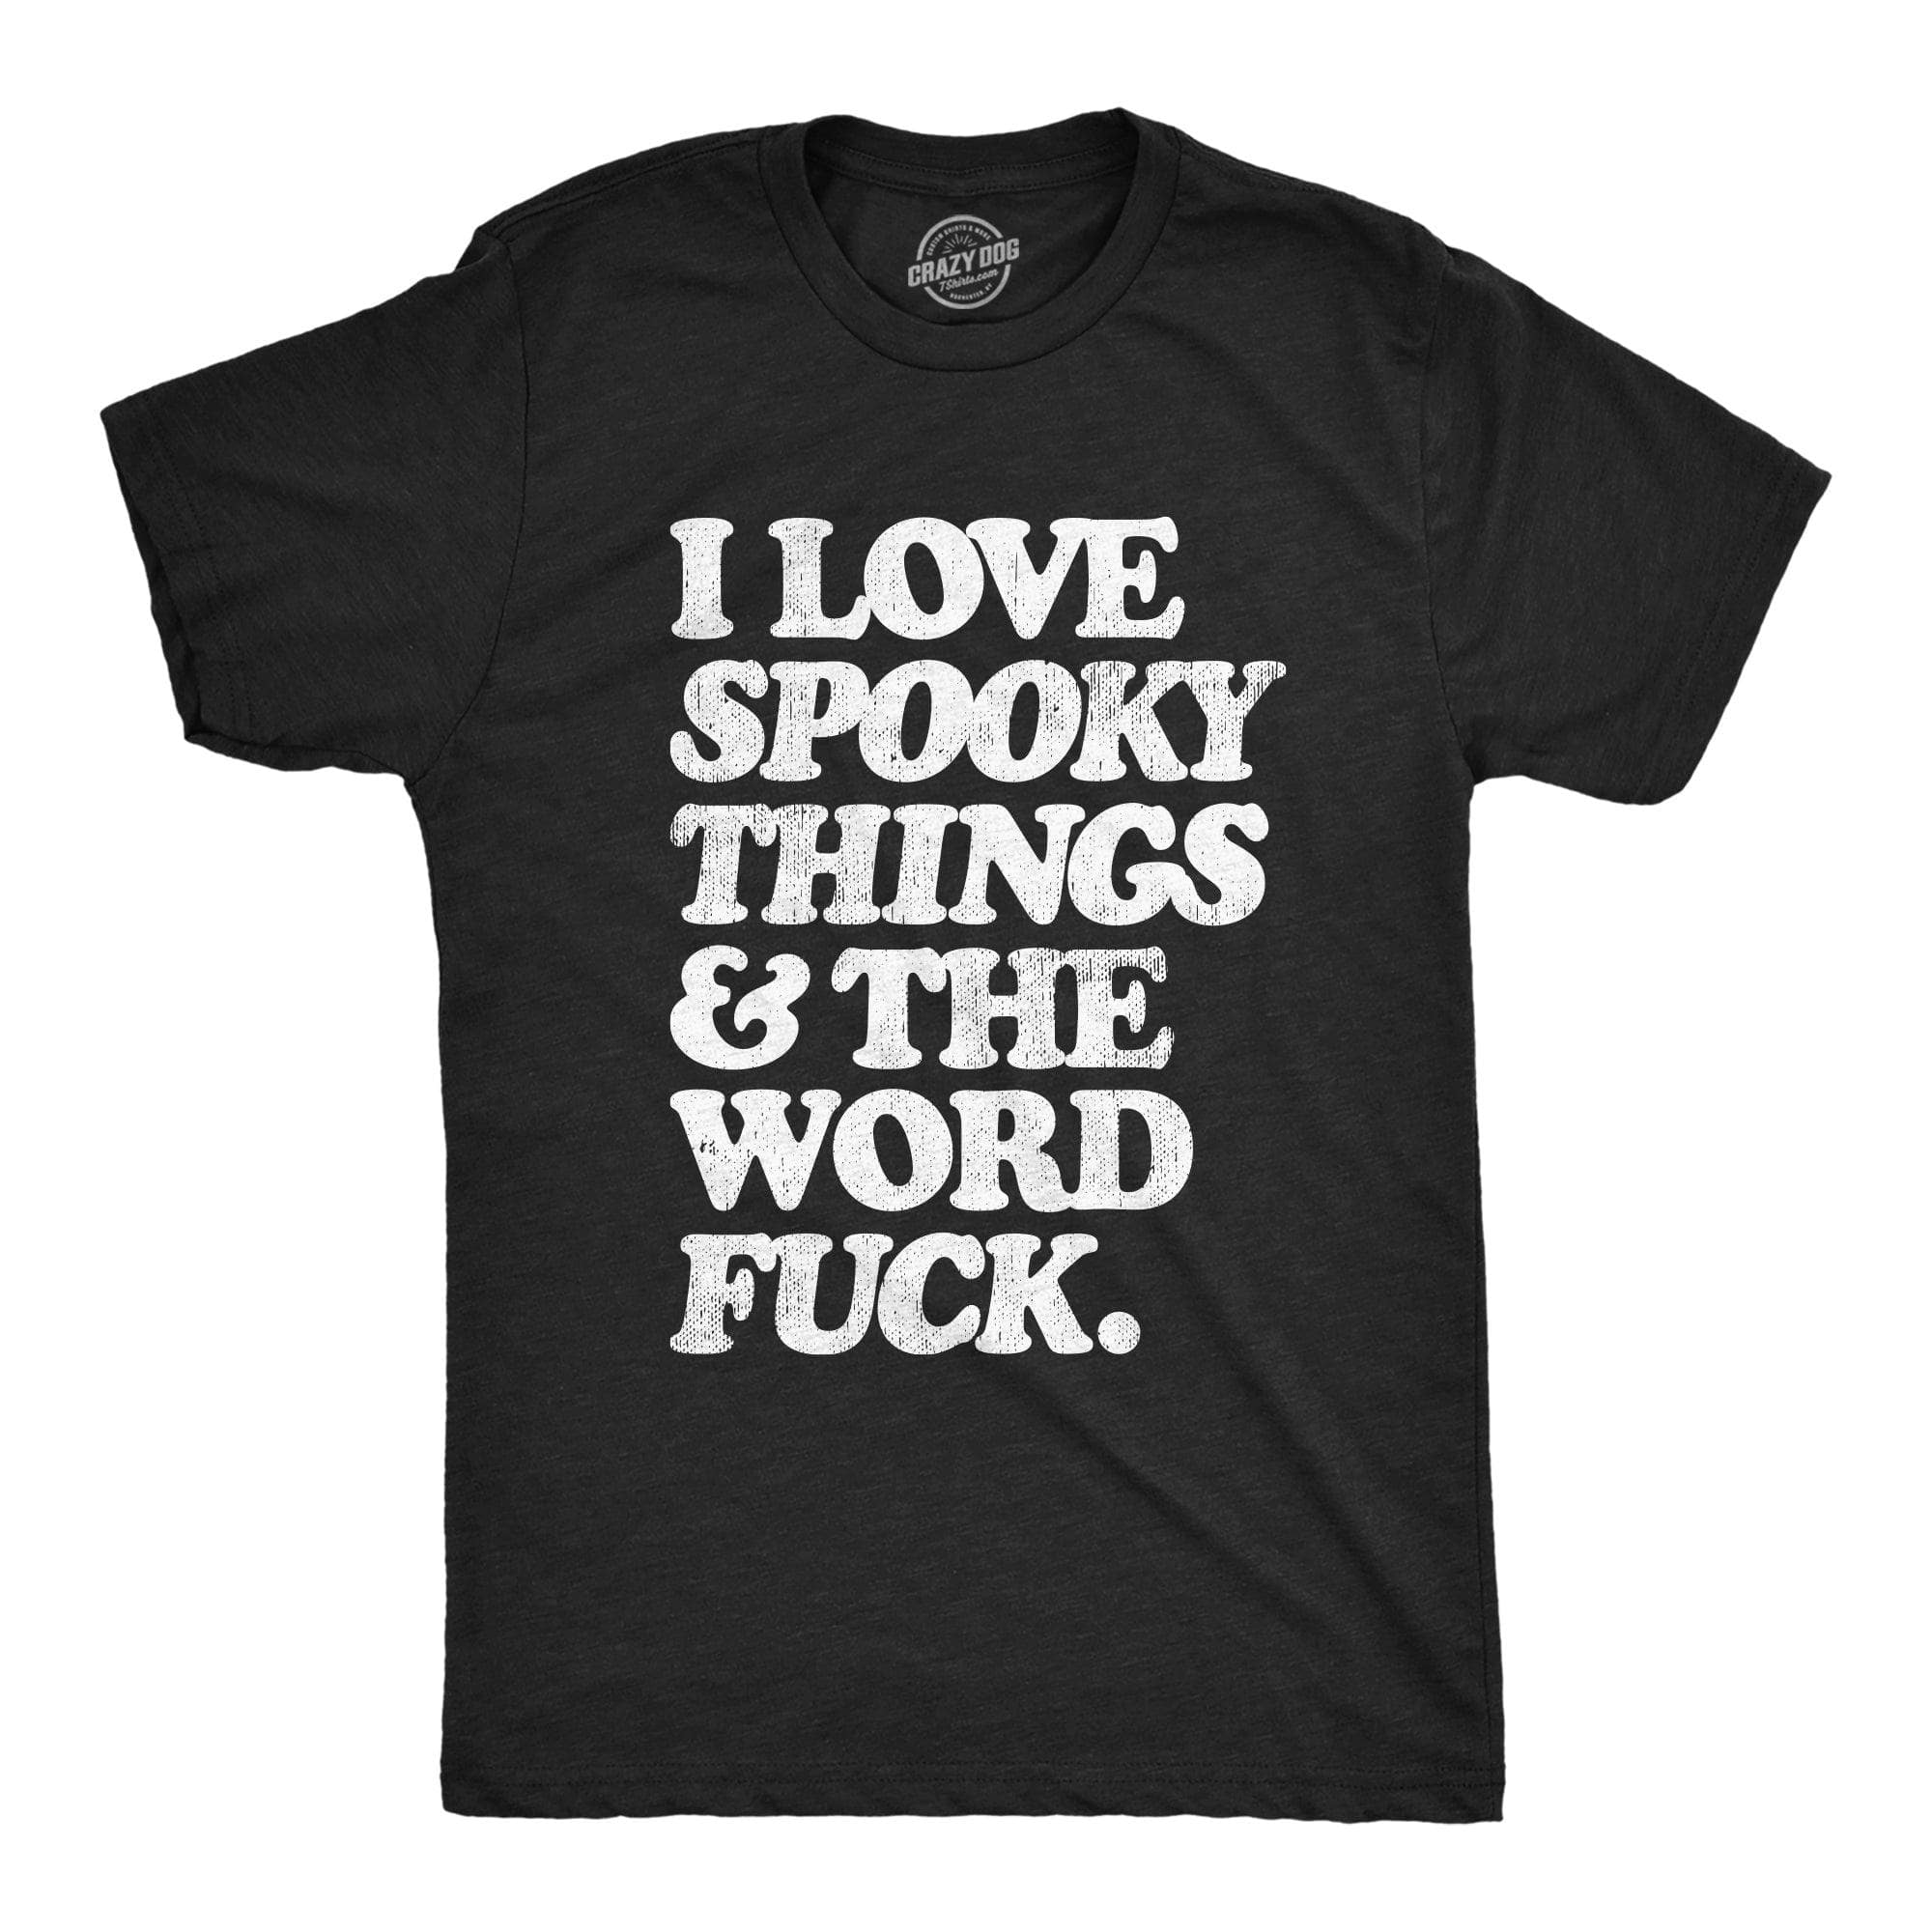 I Love Spooky Things And The Word Fuck Men's Tshirt  -  Crazy Dog T-Shirts